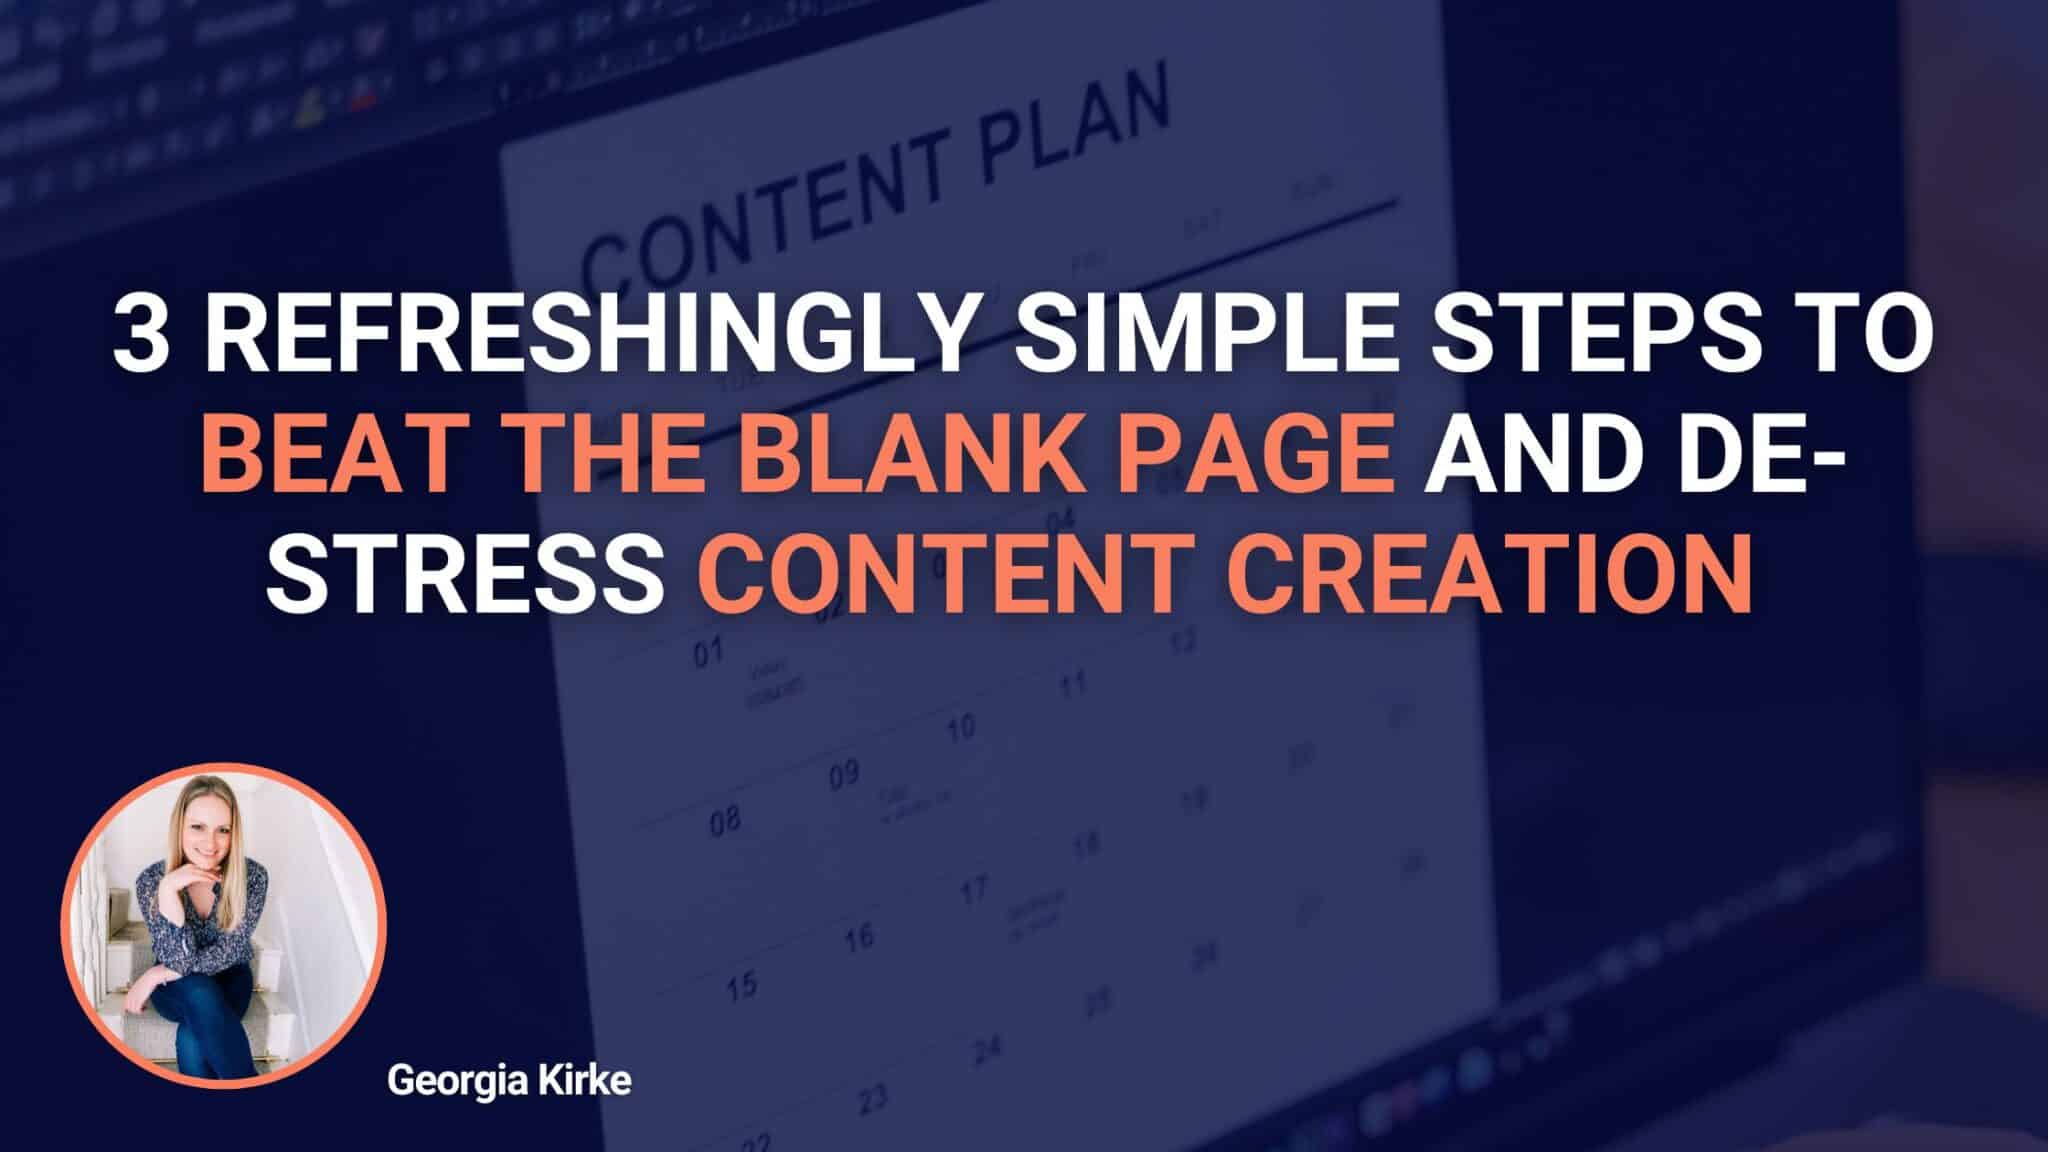 3 Refreshingly Simple Steps To Beat The Blank Page And De-stress Content Creation 